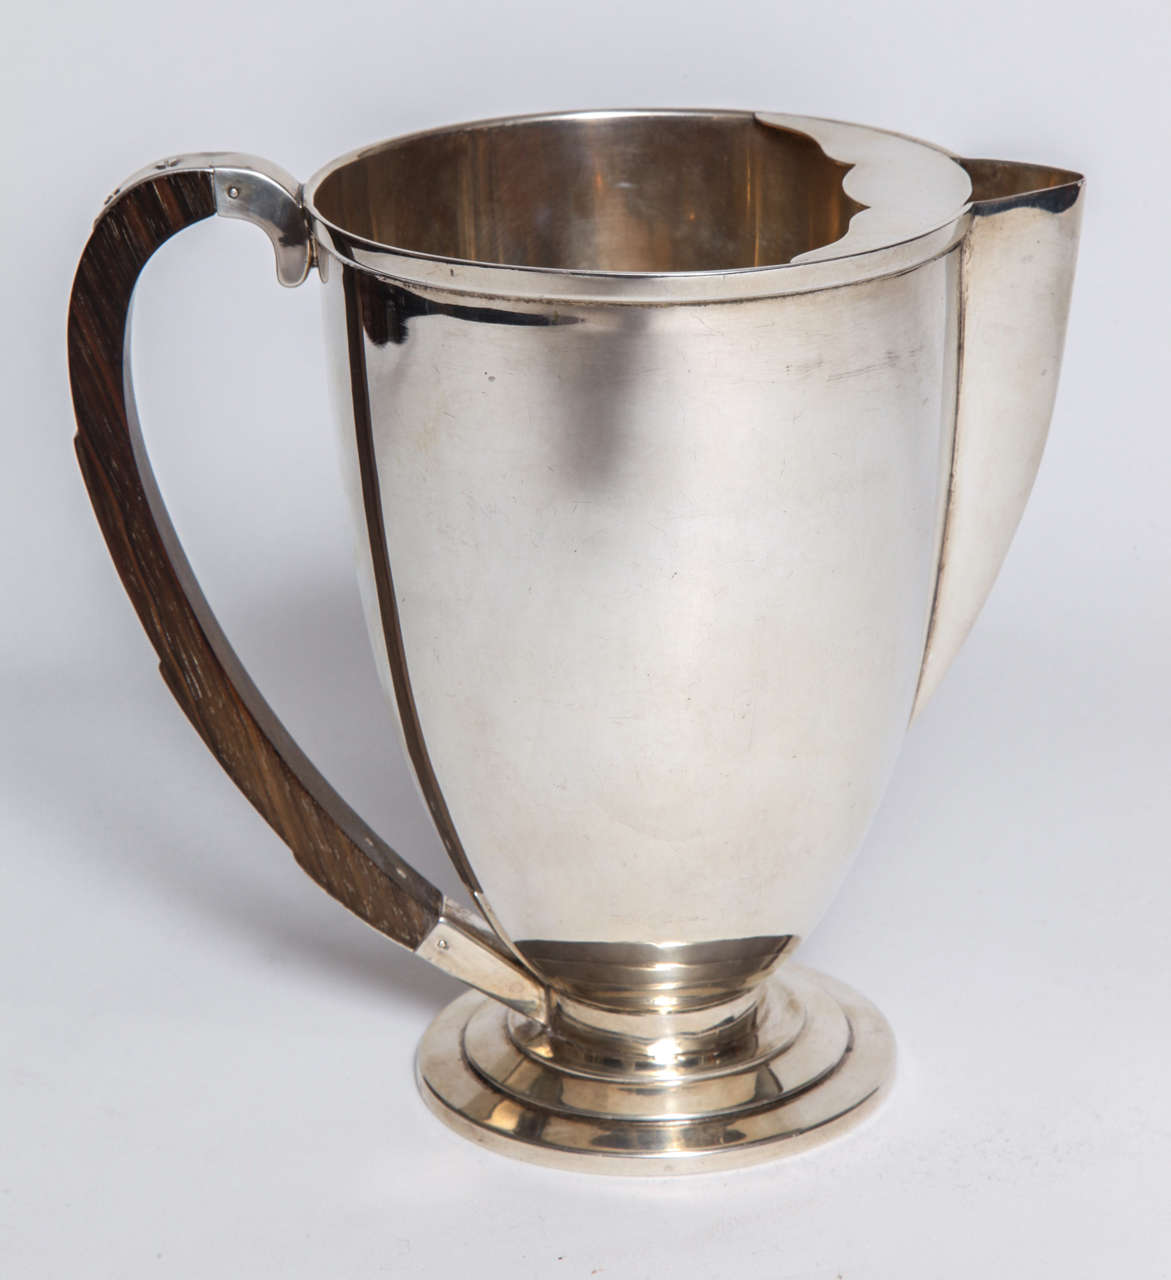 An American Art Deco water pitcher, 1928 by International Silver Company sterling silver with a stylized ebony handle. The pitcher has a round stepped base with a stylized ebony handle. Pure American Art Deco.
A Coffee Pot of identical design is